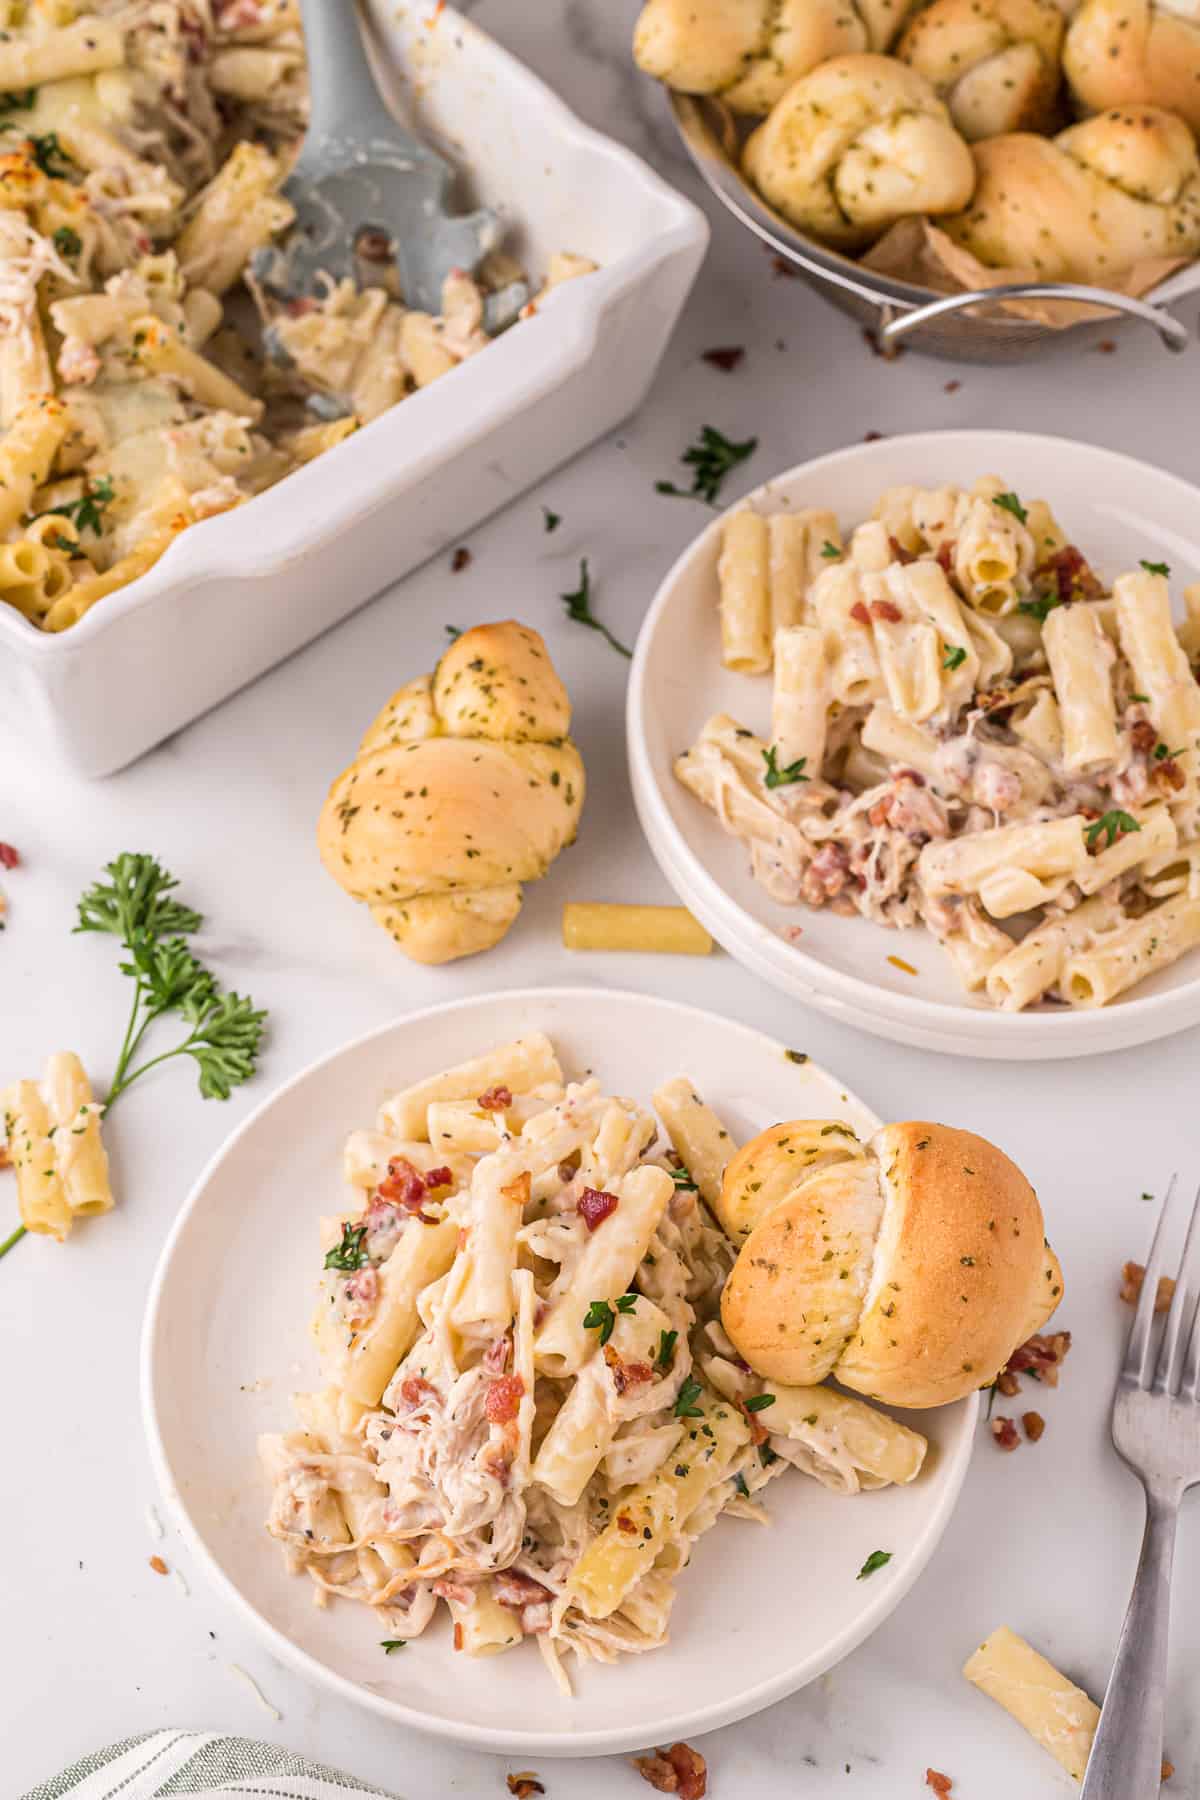 Serving of chicken bacon ziti pasta bake on a white plate with a garlic knot and an additional plated portion, more rolls, and casserole dish in the background 